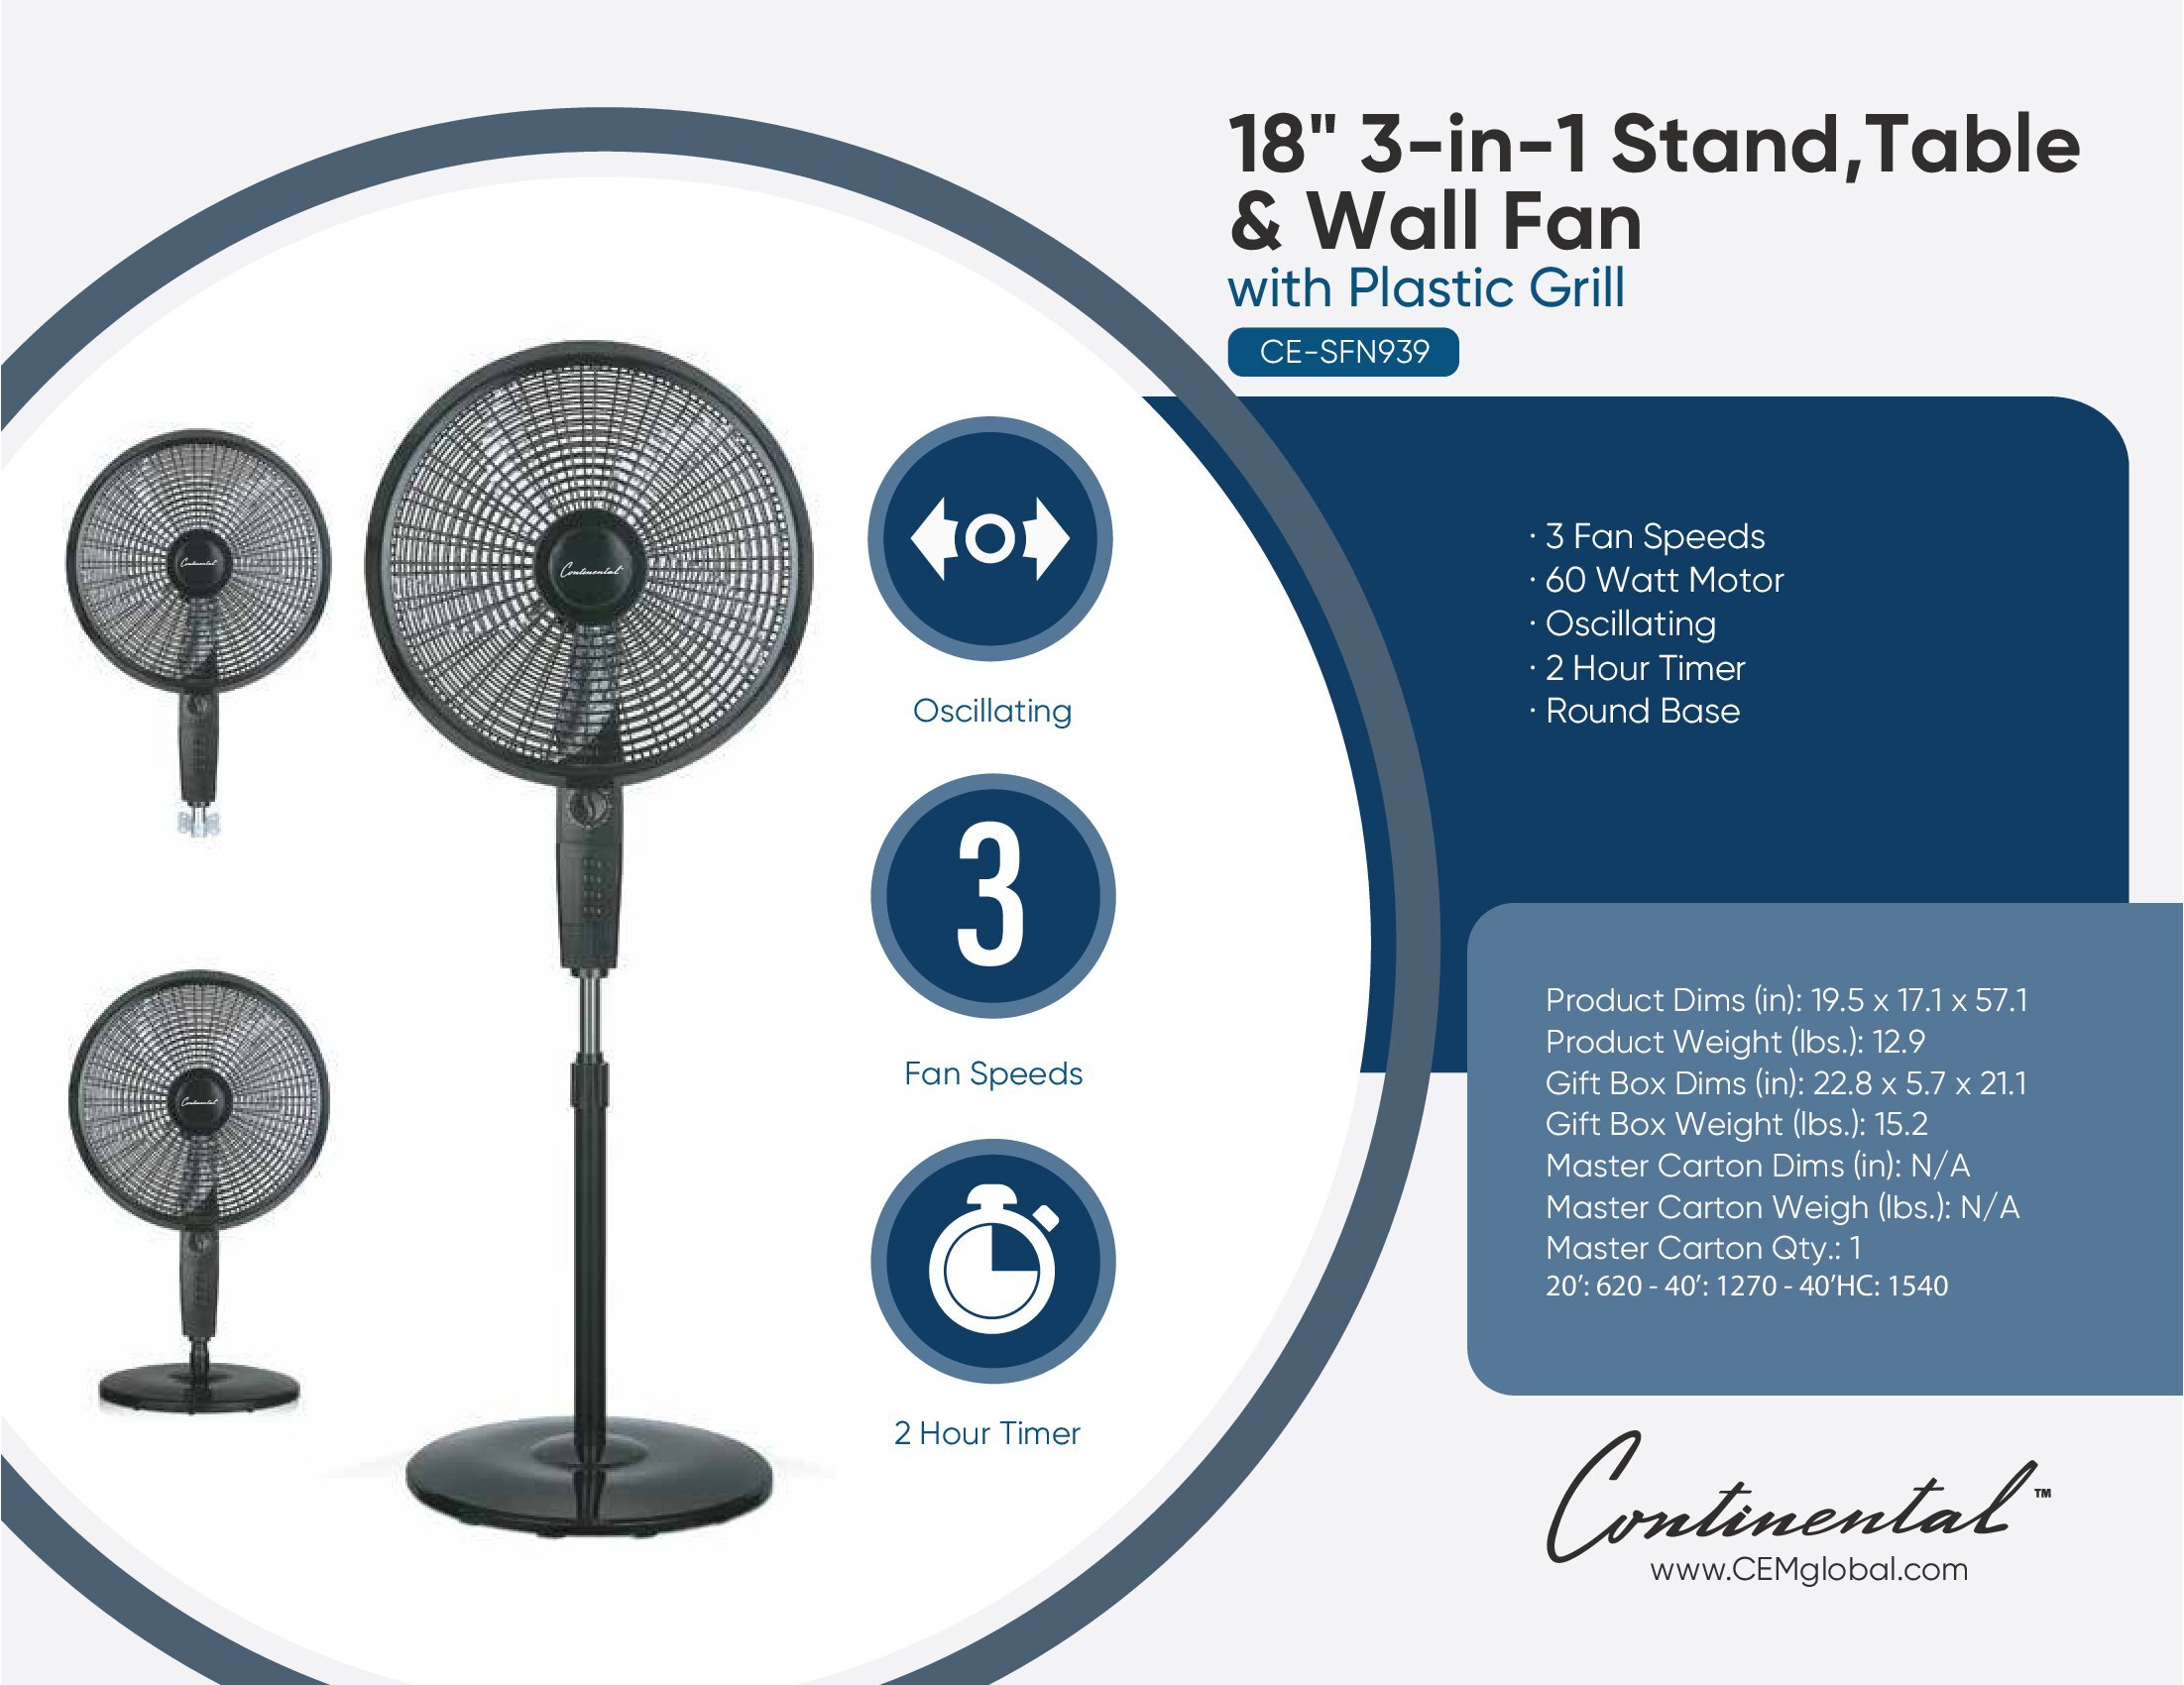 18" 3-in-1 Stand, Table & Wall Fan with Plastic Grill